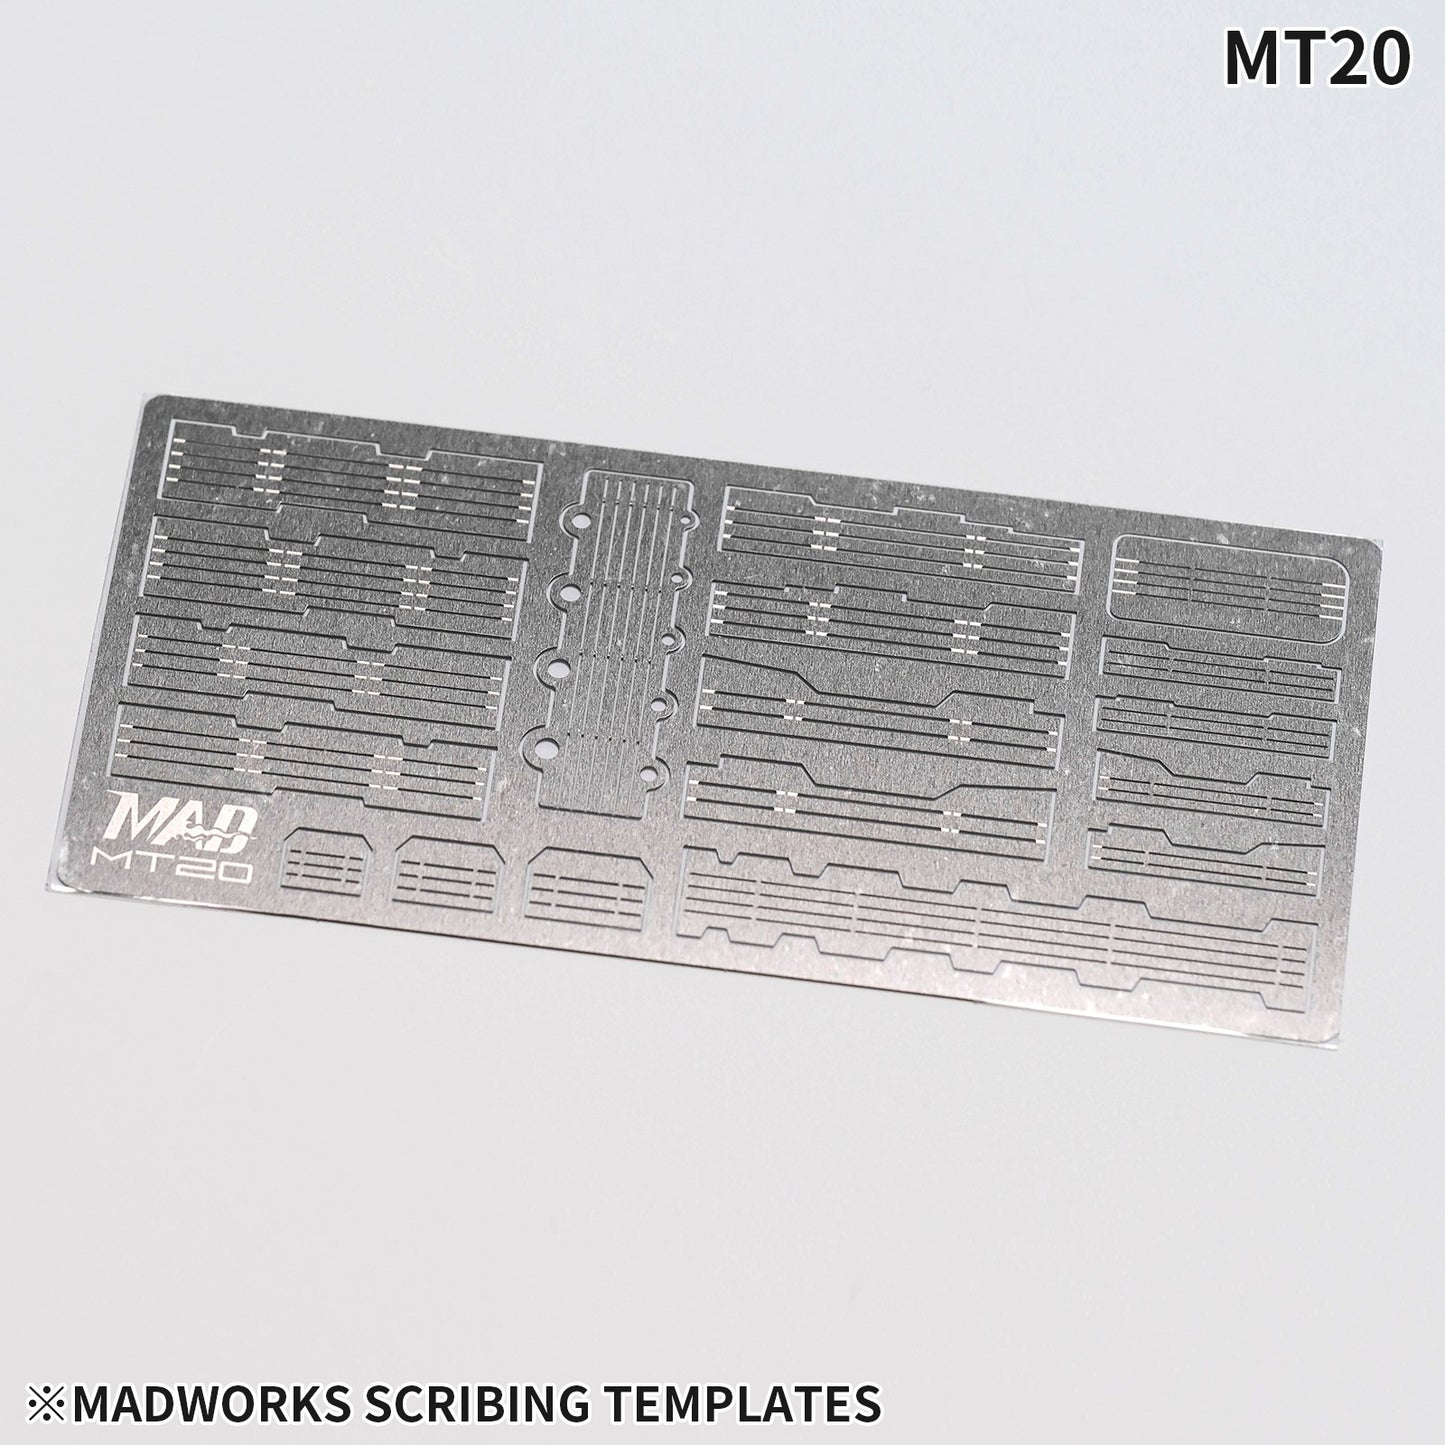 Madworks MT20 Scribing Templates With Fold Lines Photo-etched